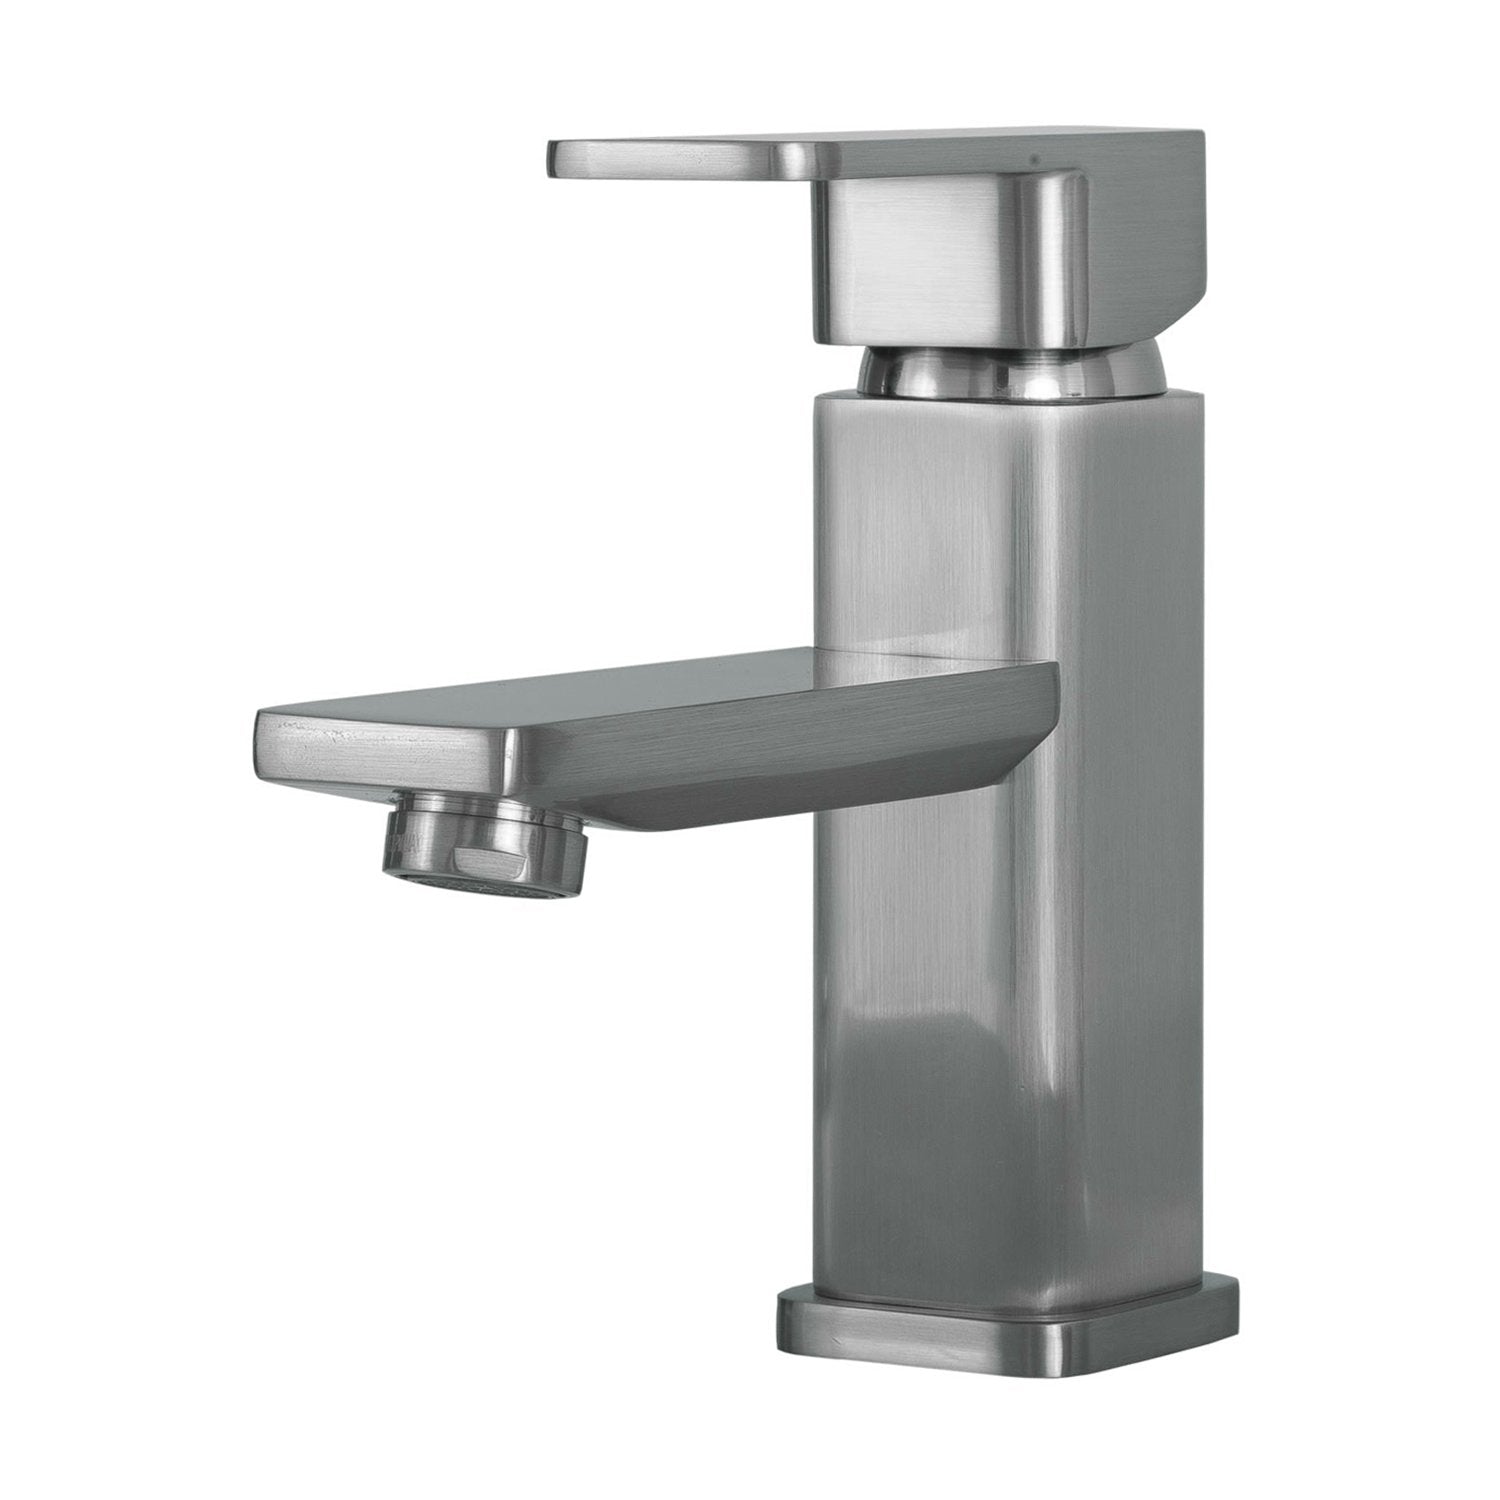 DAX Single Handle Bathroom Faucet, Brass Body, Brushed Finish, 5-15/16 x 6-1/8 Inches (DAX-8510-BN)